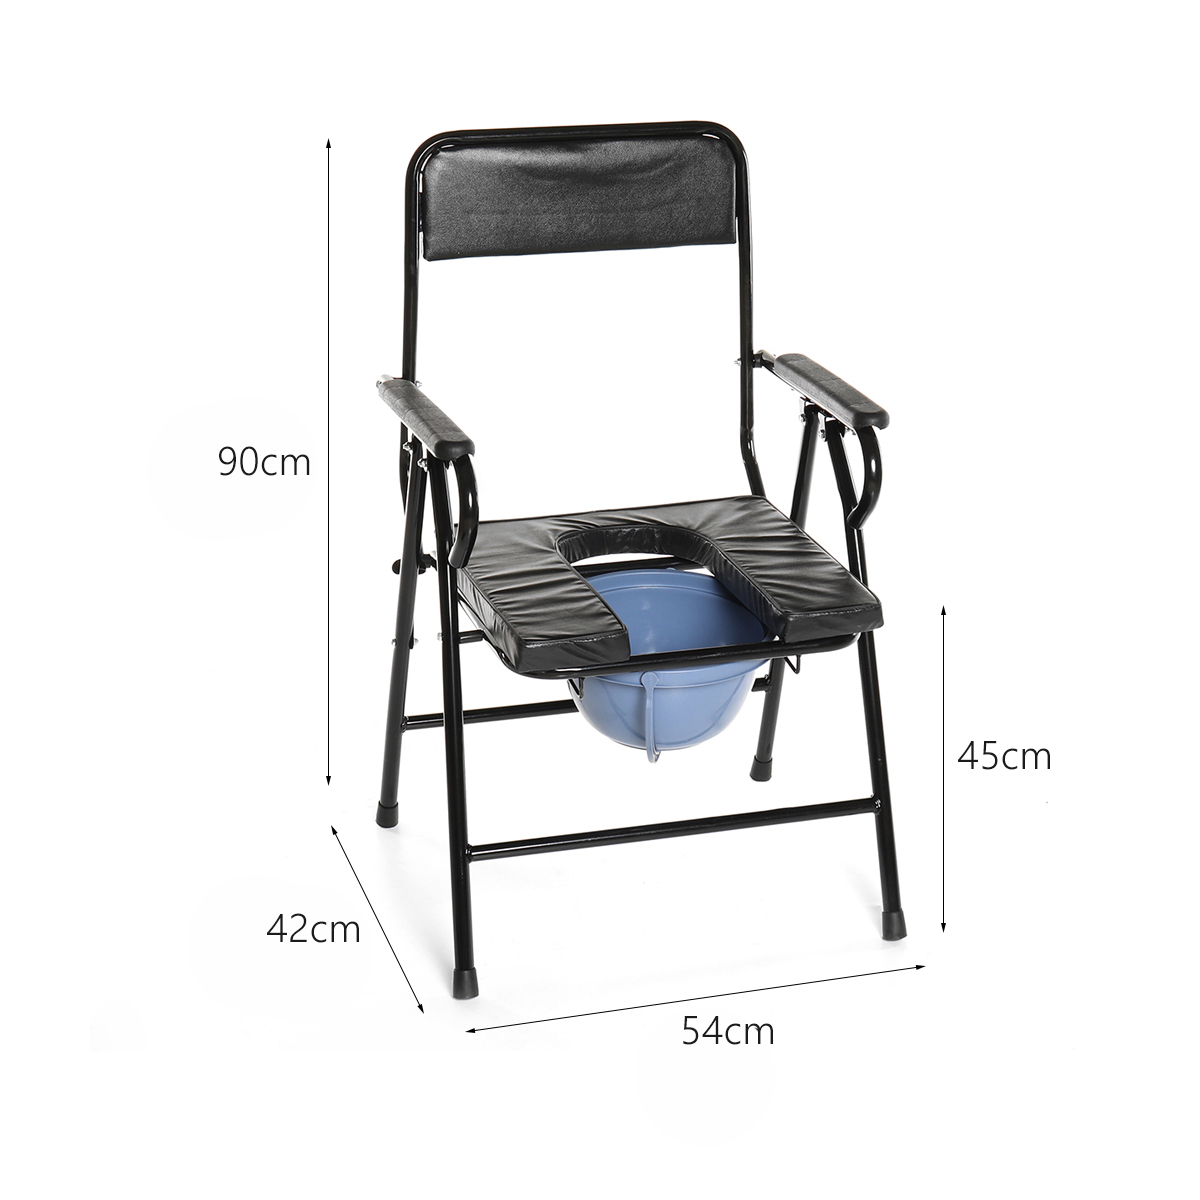 Soft-Folding-Commode-Chair-Portable-Toilet-Pedestal-Pan-150KG-High-Quality-Steel-1614716